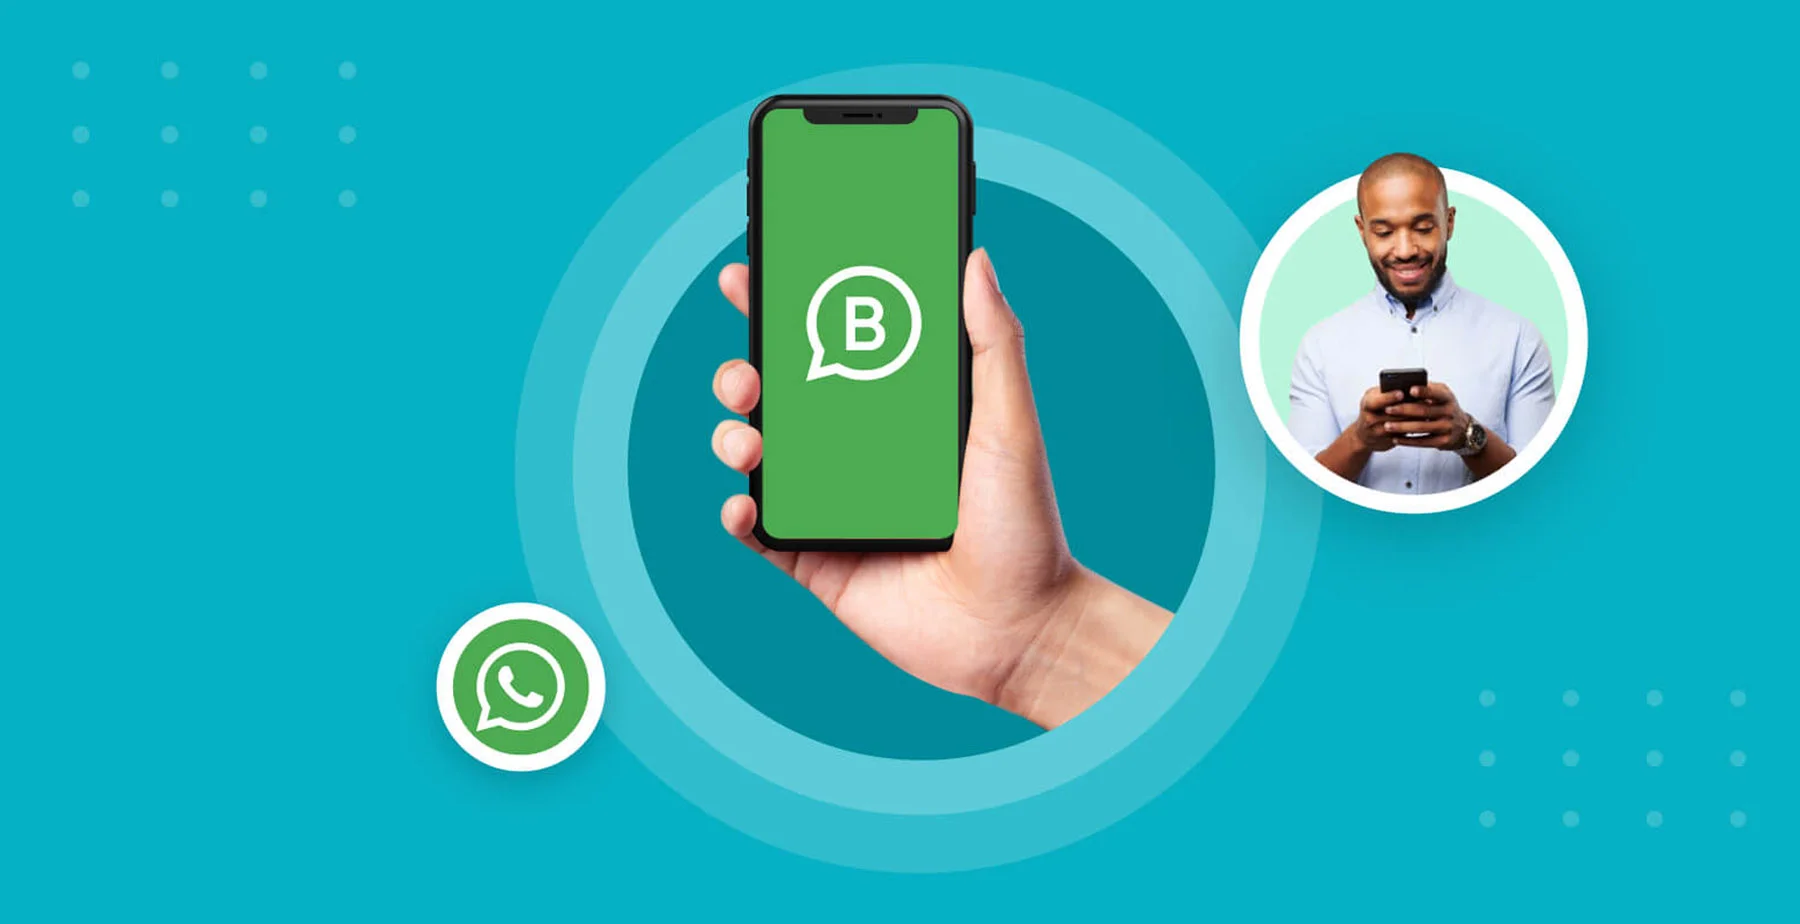 Discover 10 Key Benefits and Features of WhatsApp Business